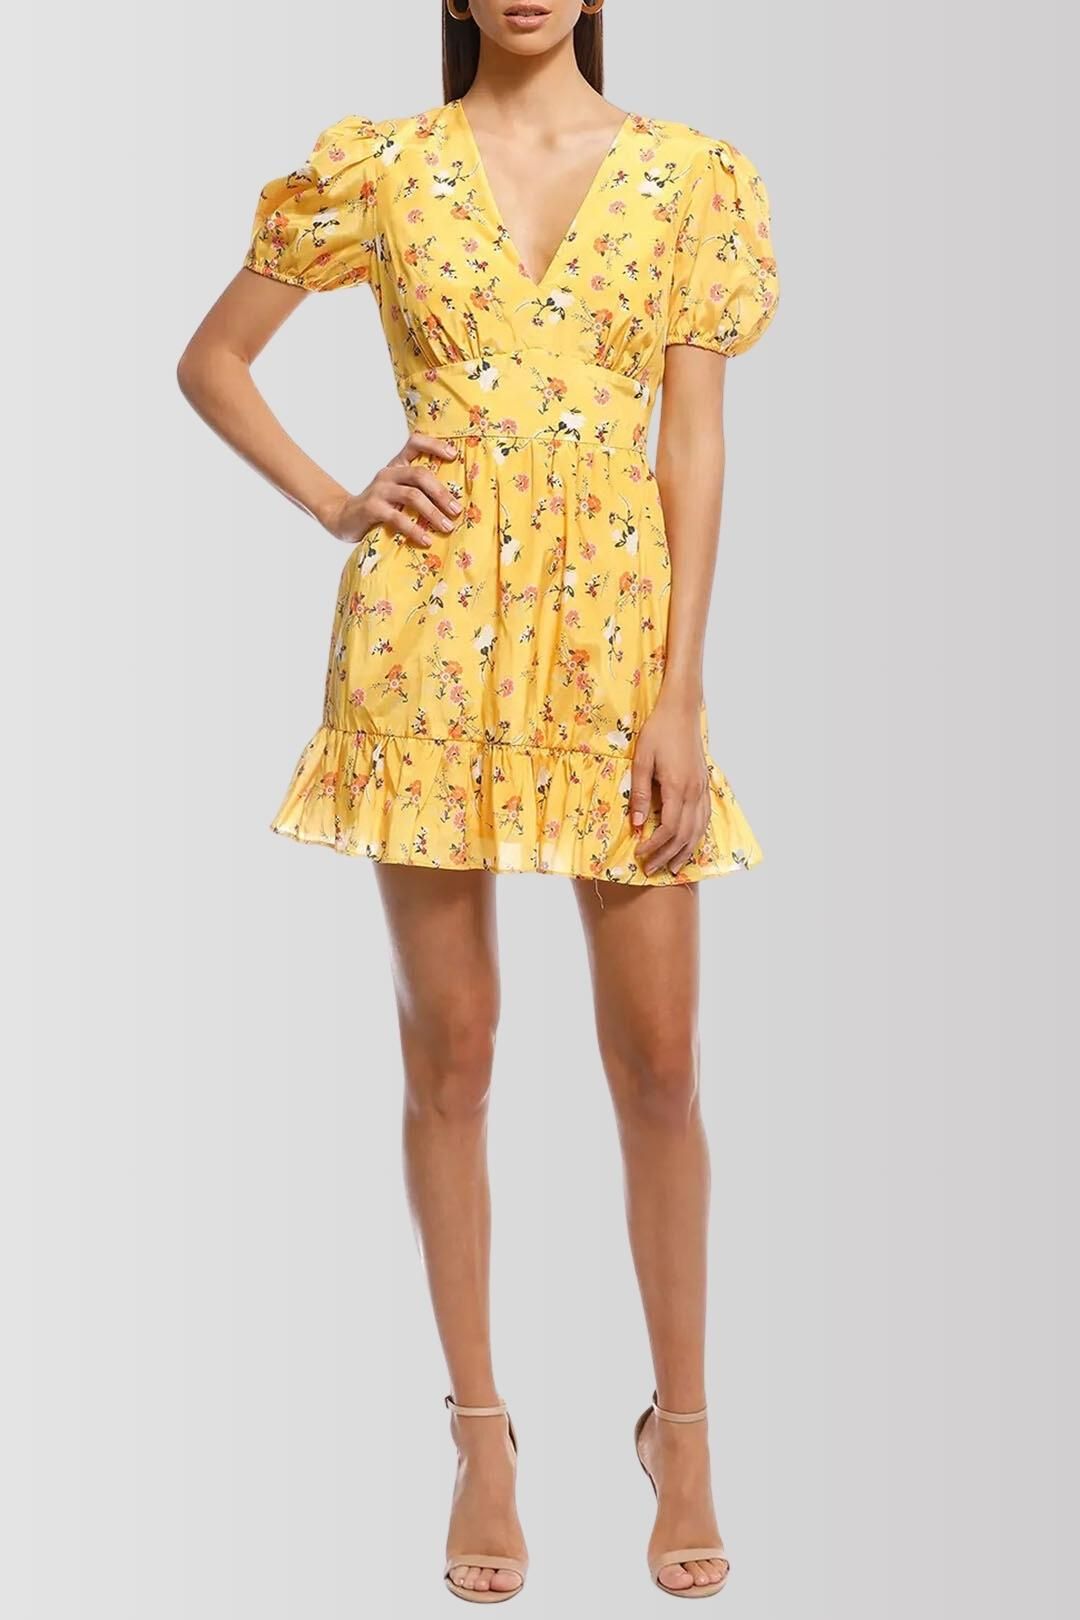 Talulah Tansy Mini Floral Dress in Yellow